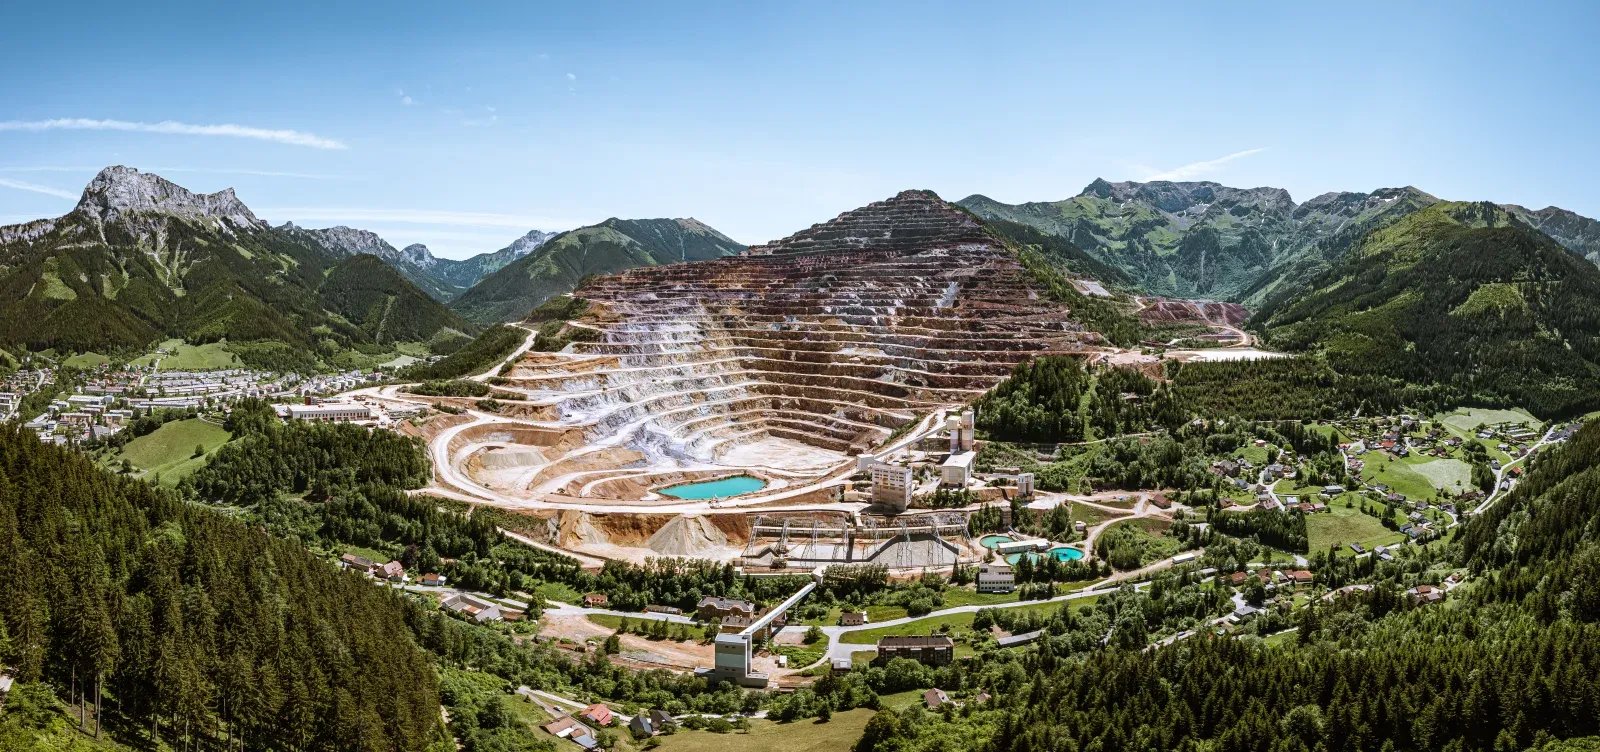 Erzberg mine 2022 Guide - Opening hours, prices ...